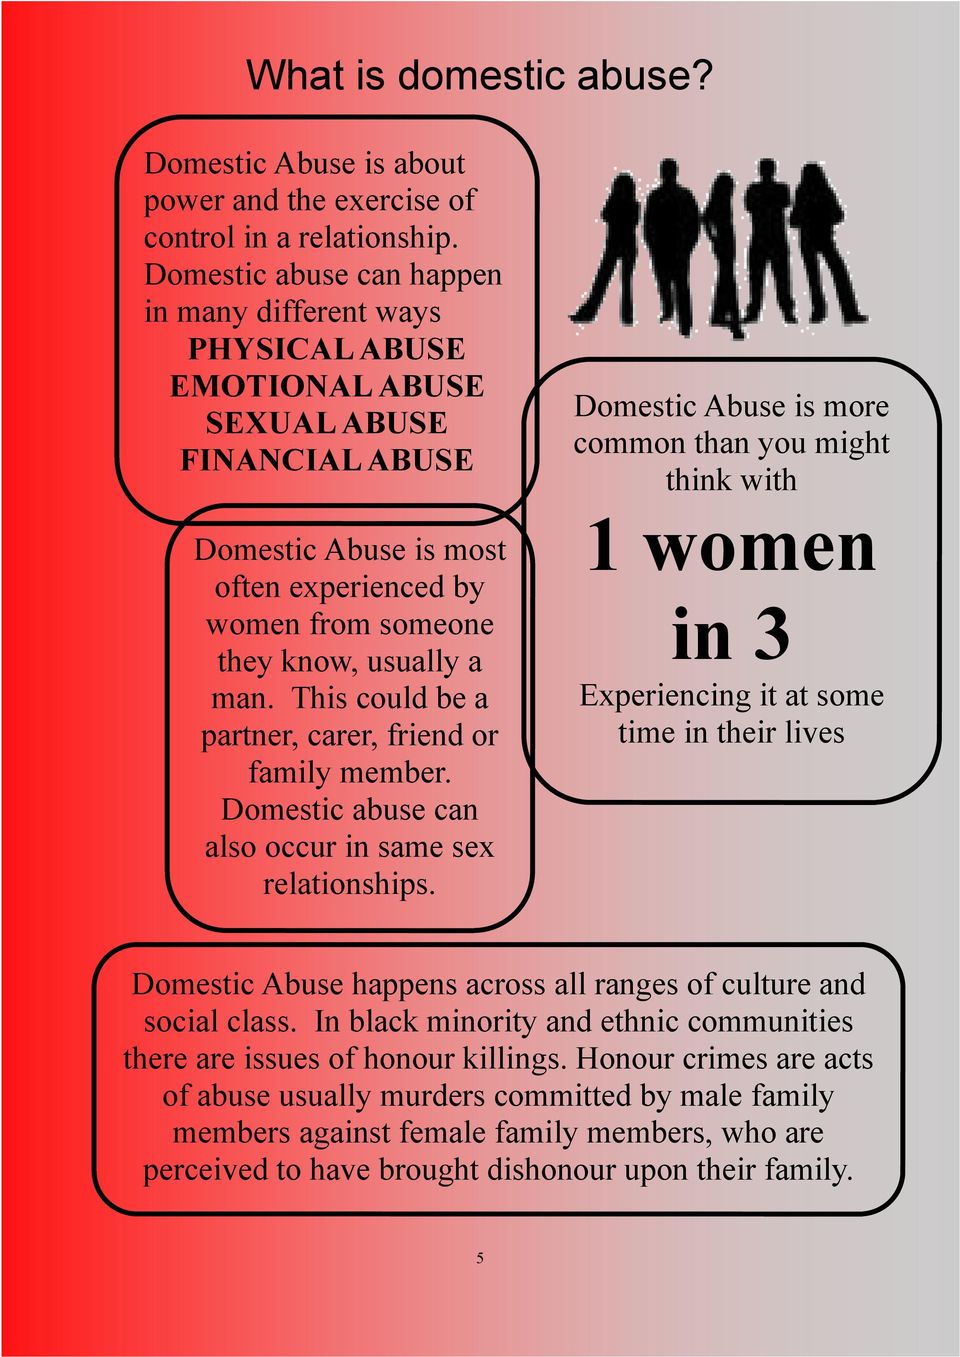 This could be a partner, carer, friend or family member. Domestic abuse can also occur in same sex relationships.